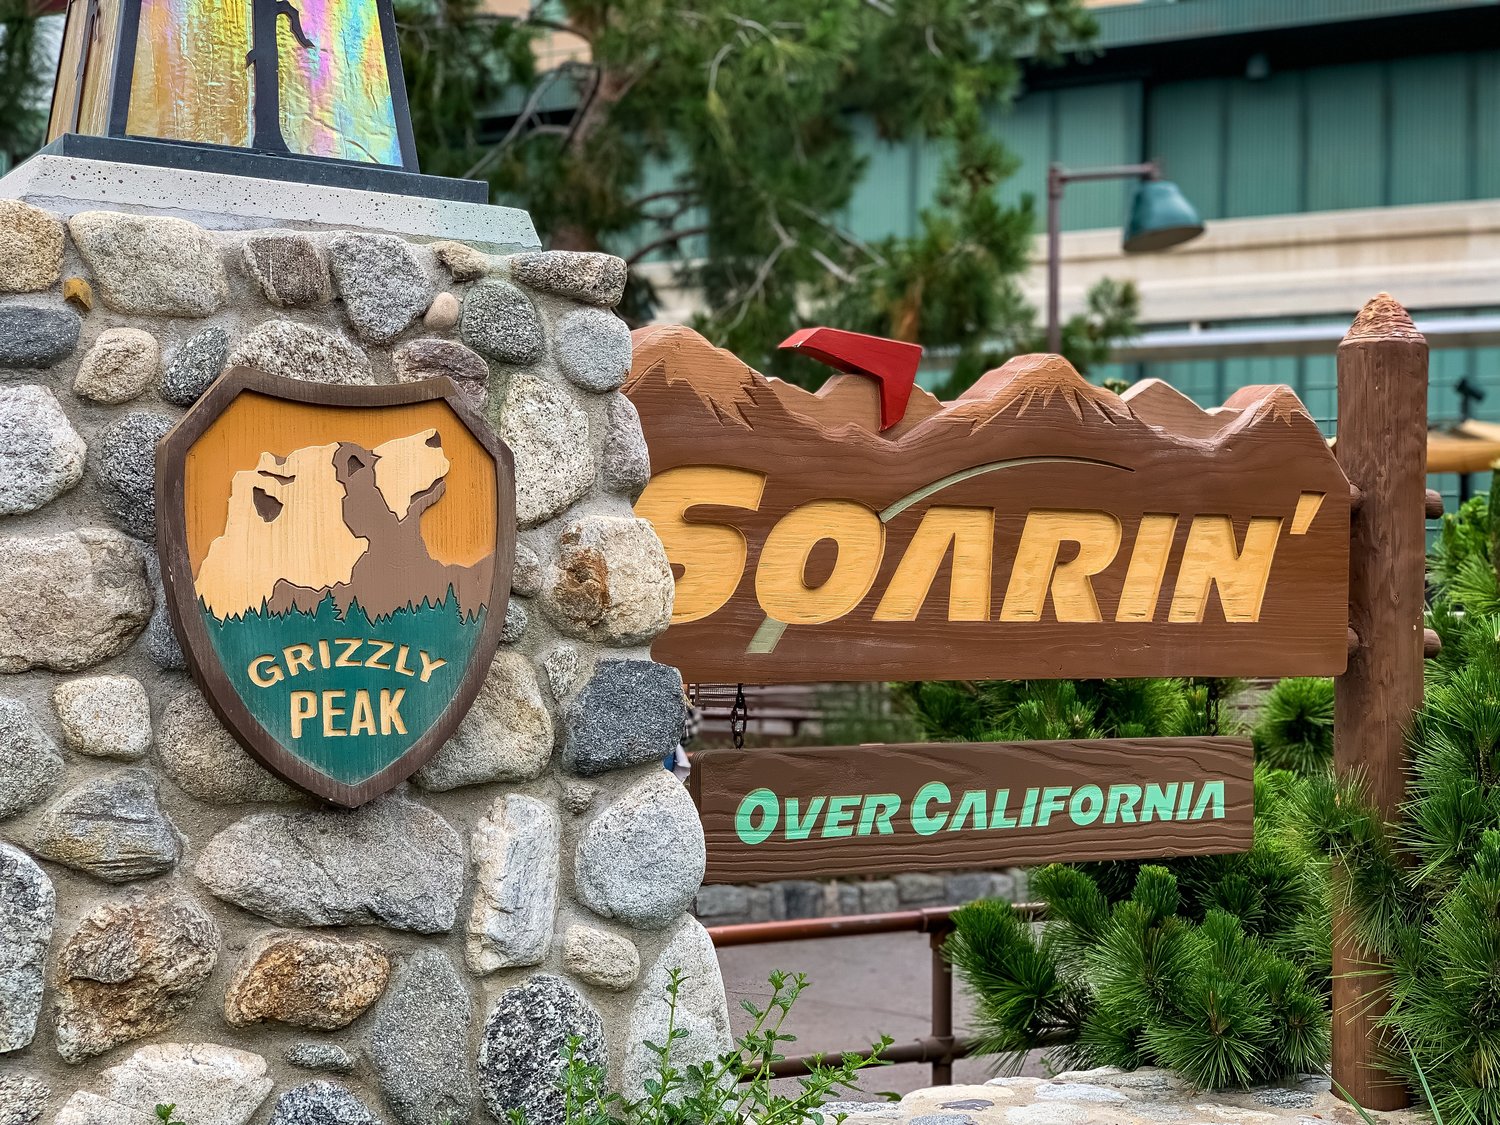 Soarin’ Over California To Return To Disney’s California Adventure For Food and Wine 2022